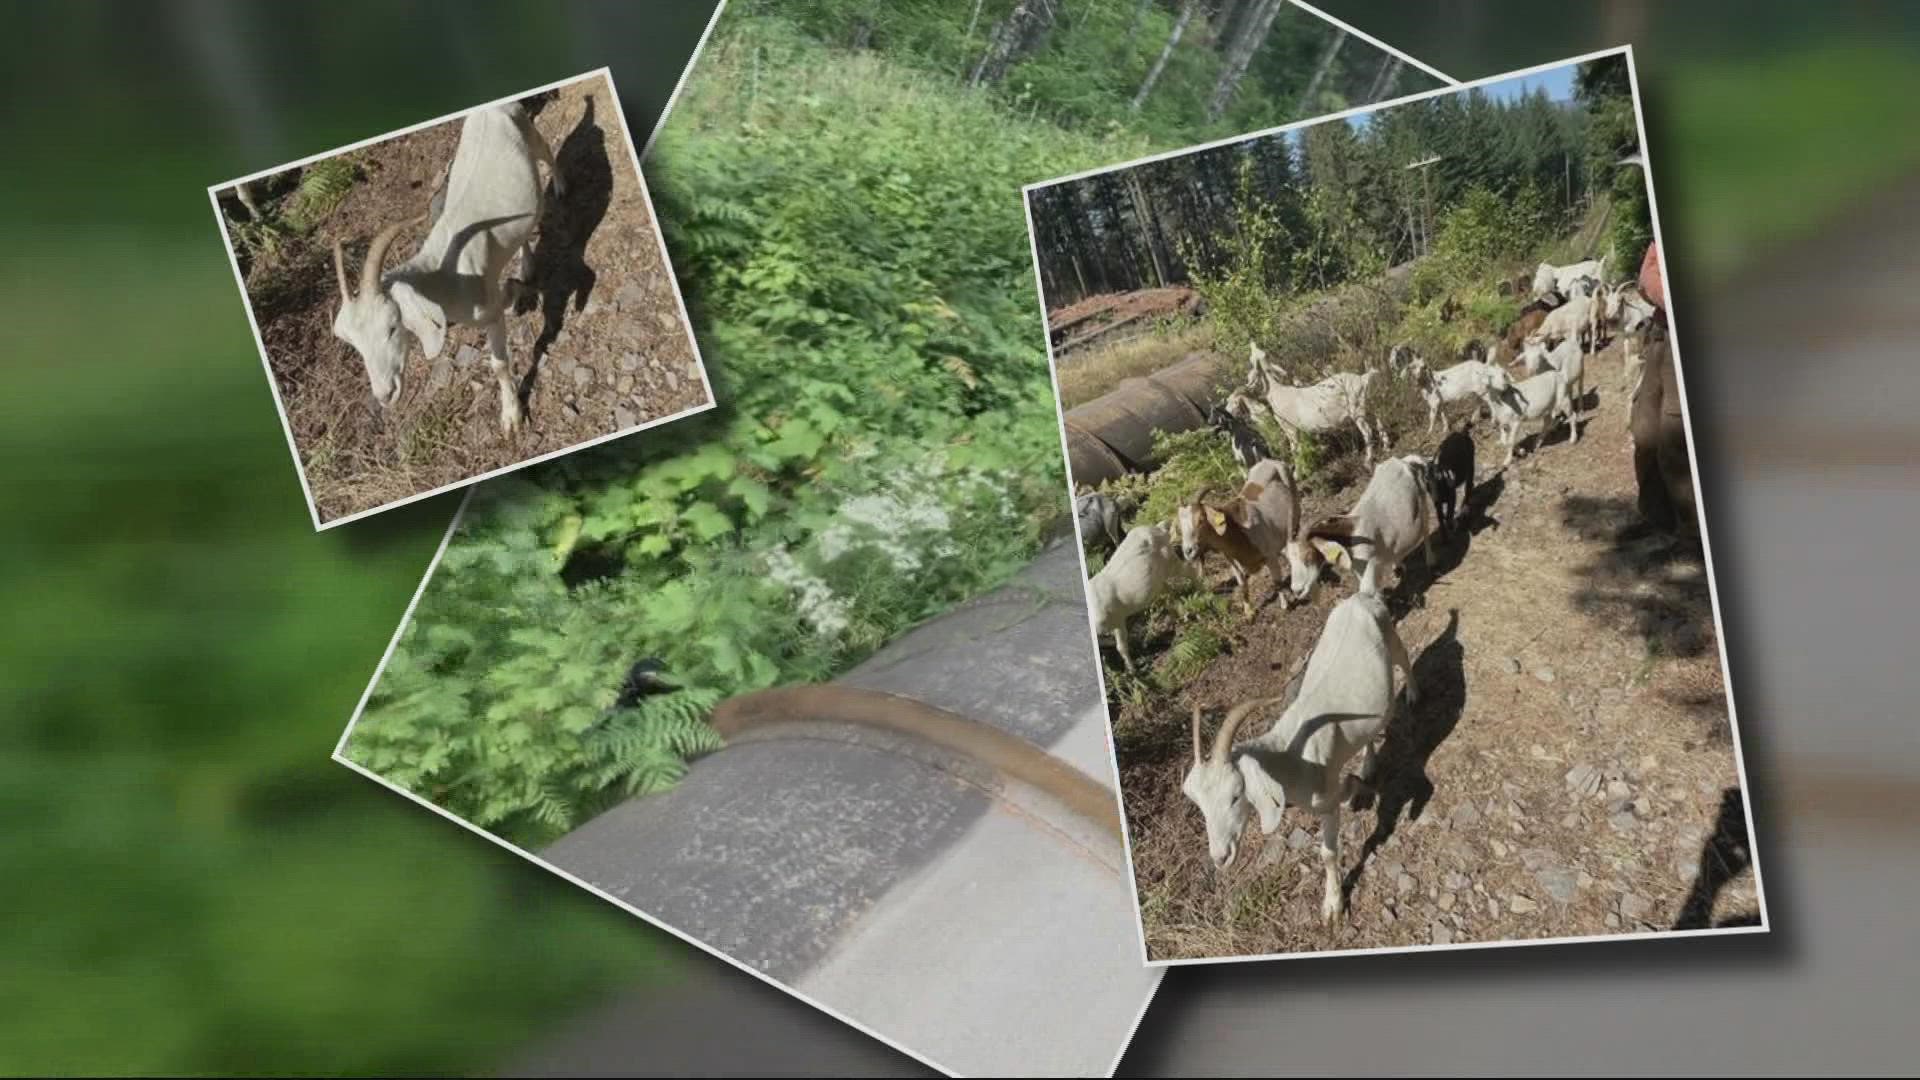 Fast-growing bushes can block access to services like the Oak Grove pipeline near Estacada. That's why PGE has brought in a team of goats to safely clear the brush.